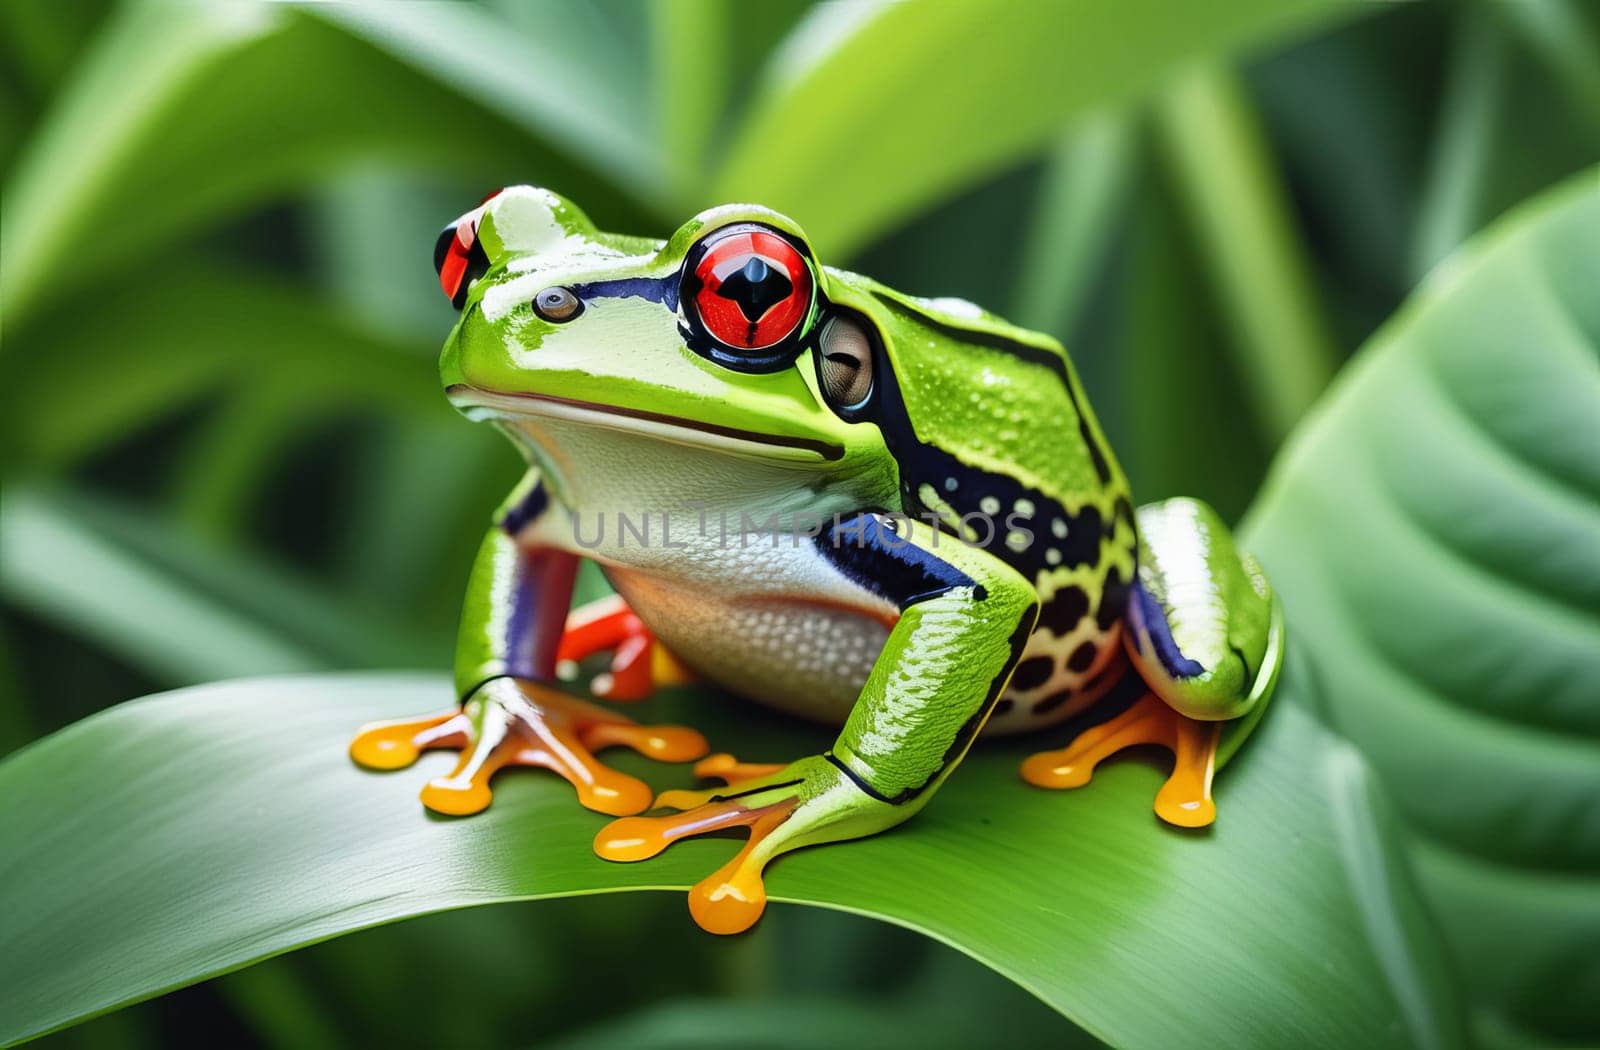 A tropical little green frog with red eyes sits on a branch of a tropical plant with its natural habitat.